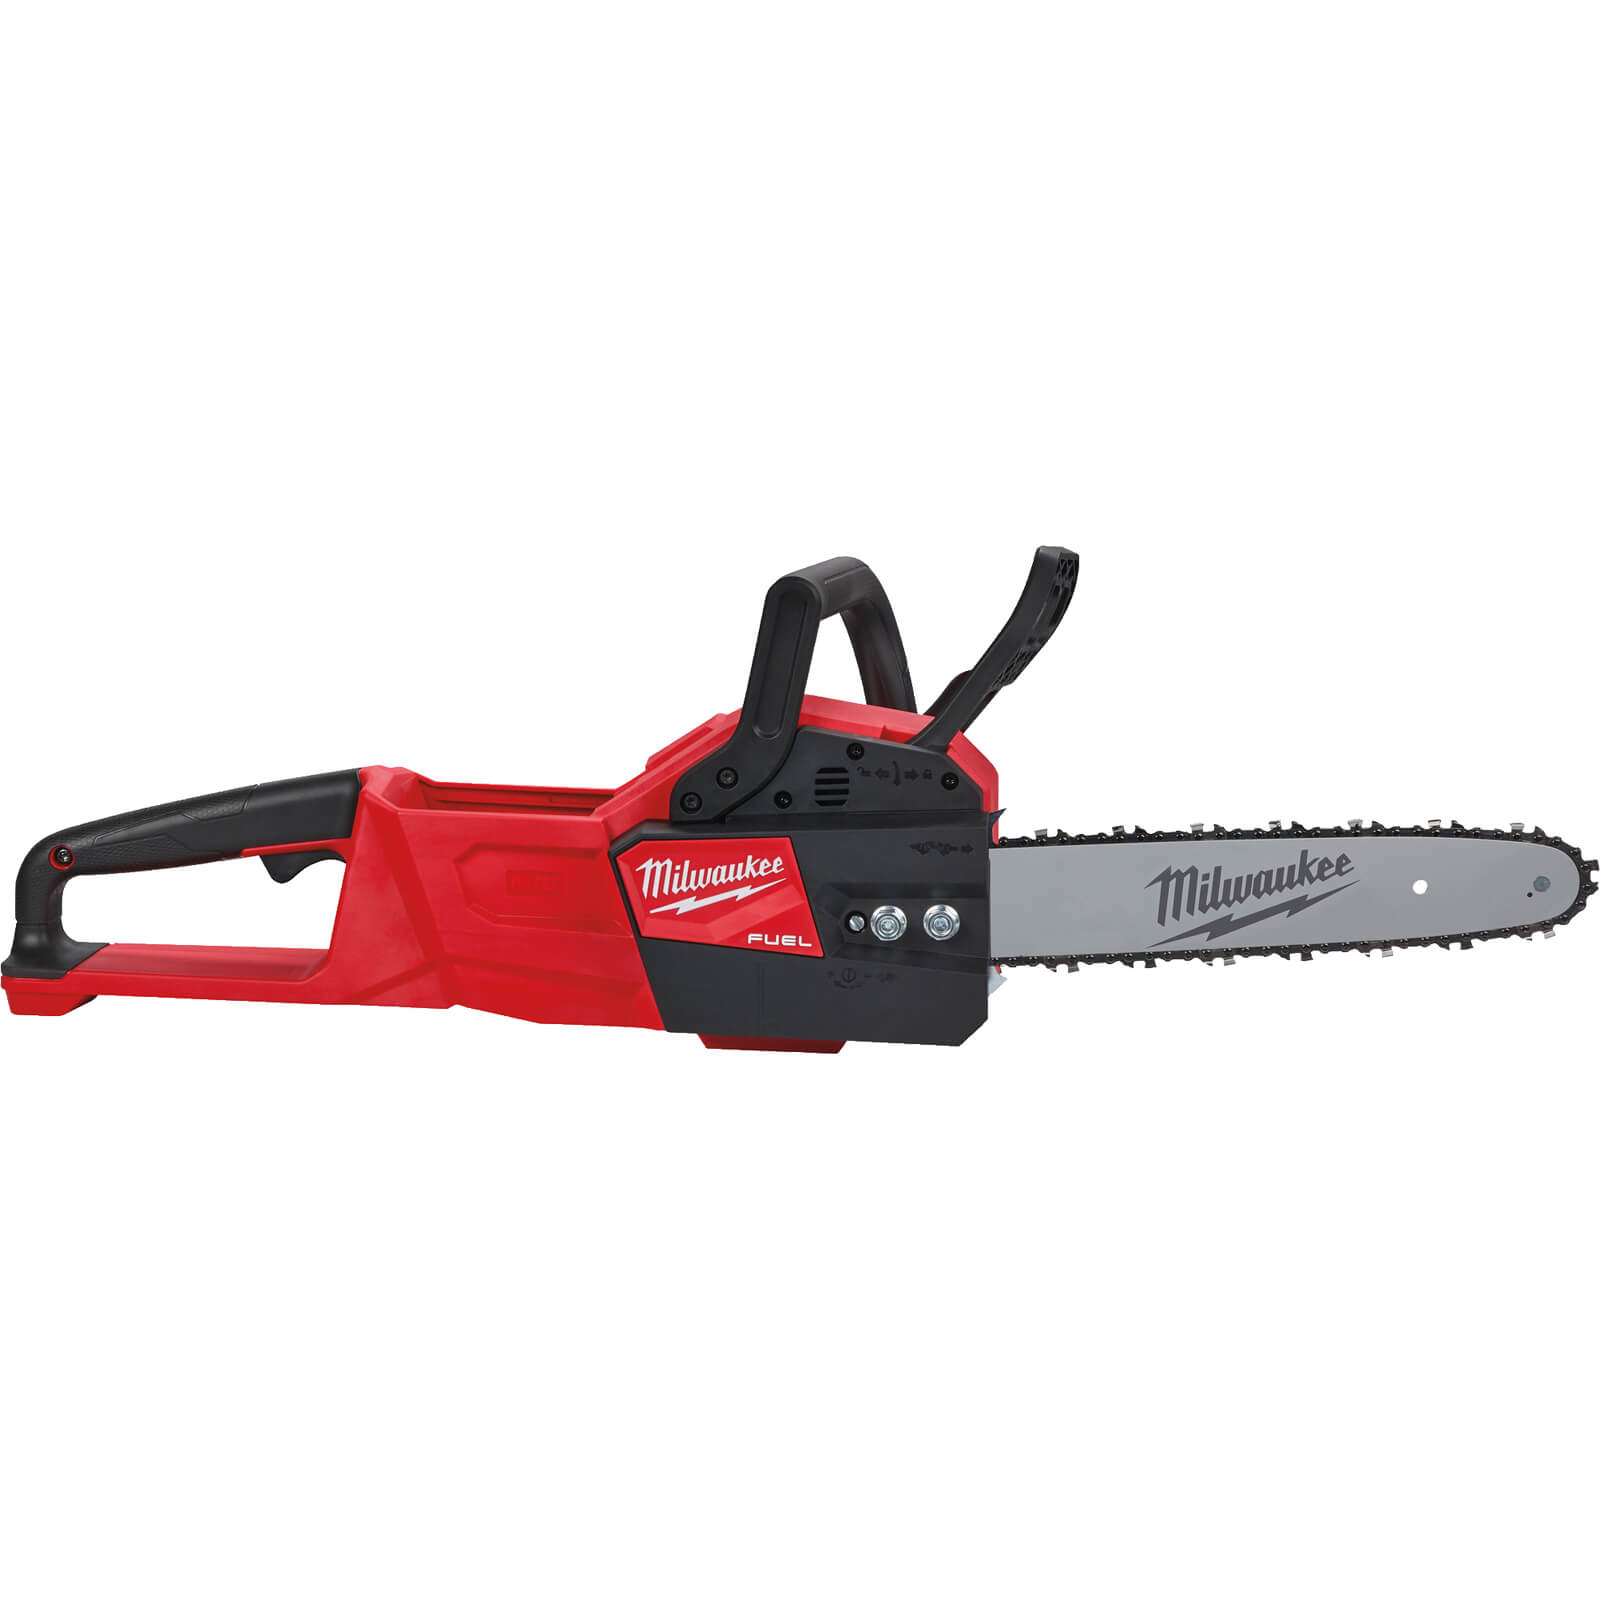 Image of Milwaukee M18 FCHSC Fuel 18v Cordless Brushless Chainsaw 300mm No Batteries No Charger